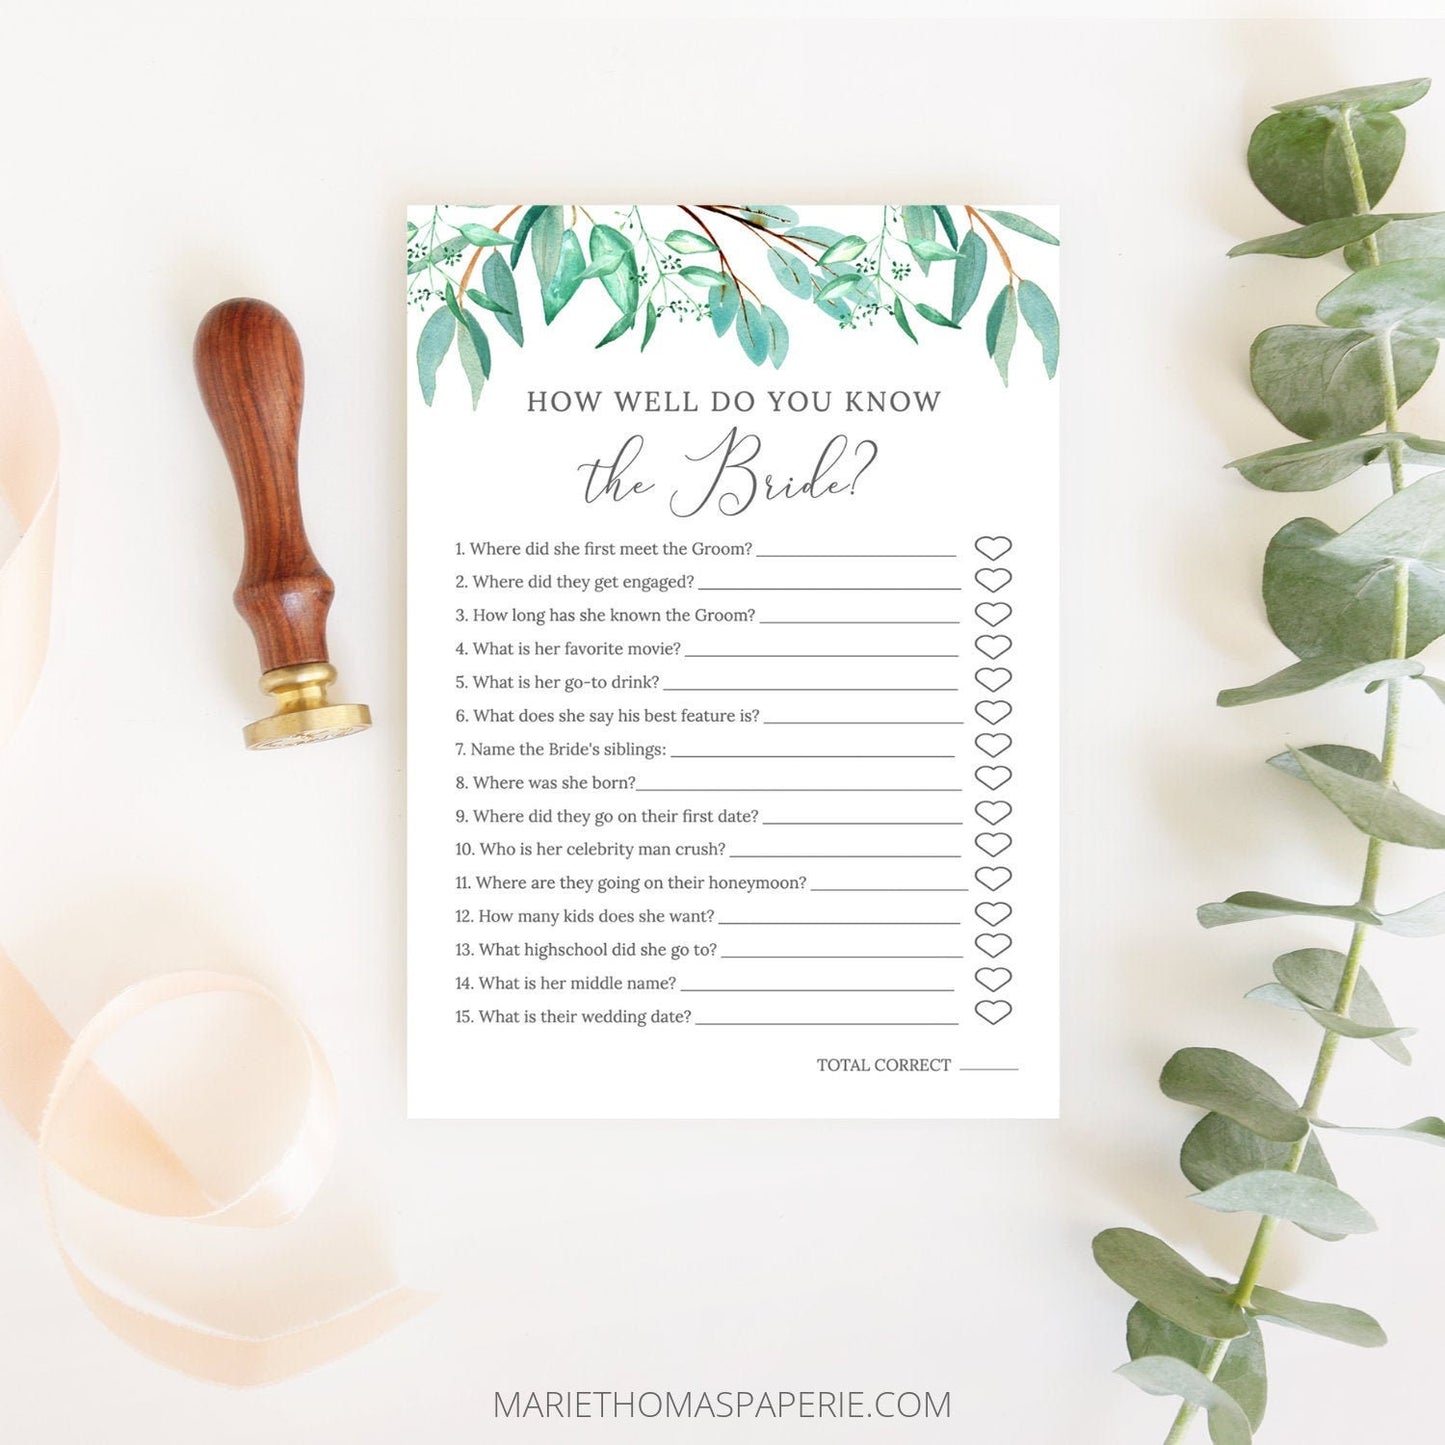 Editable How Well Do You Know the Bride Bridal Shower Games Bridal Game Wedding Games Template